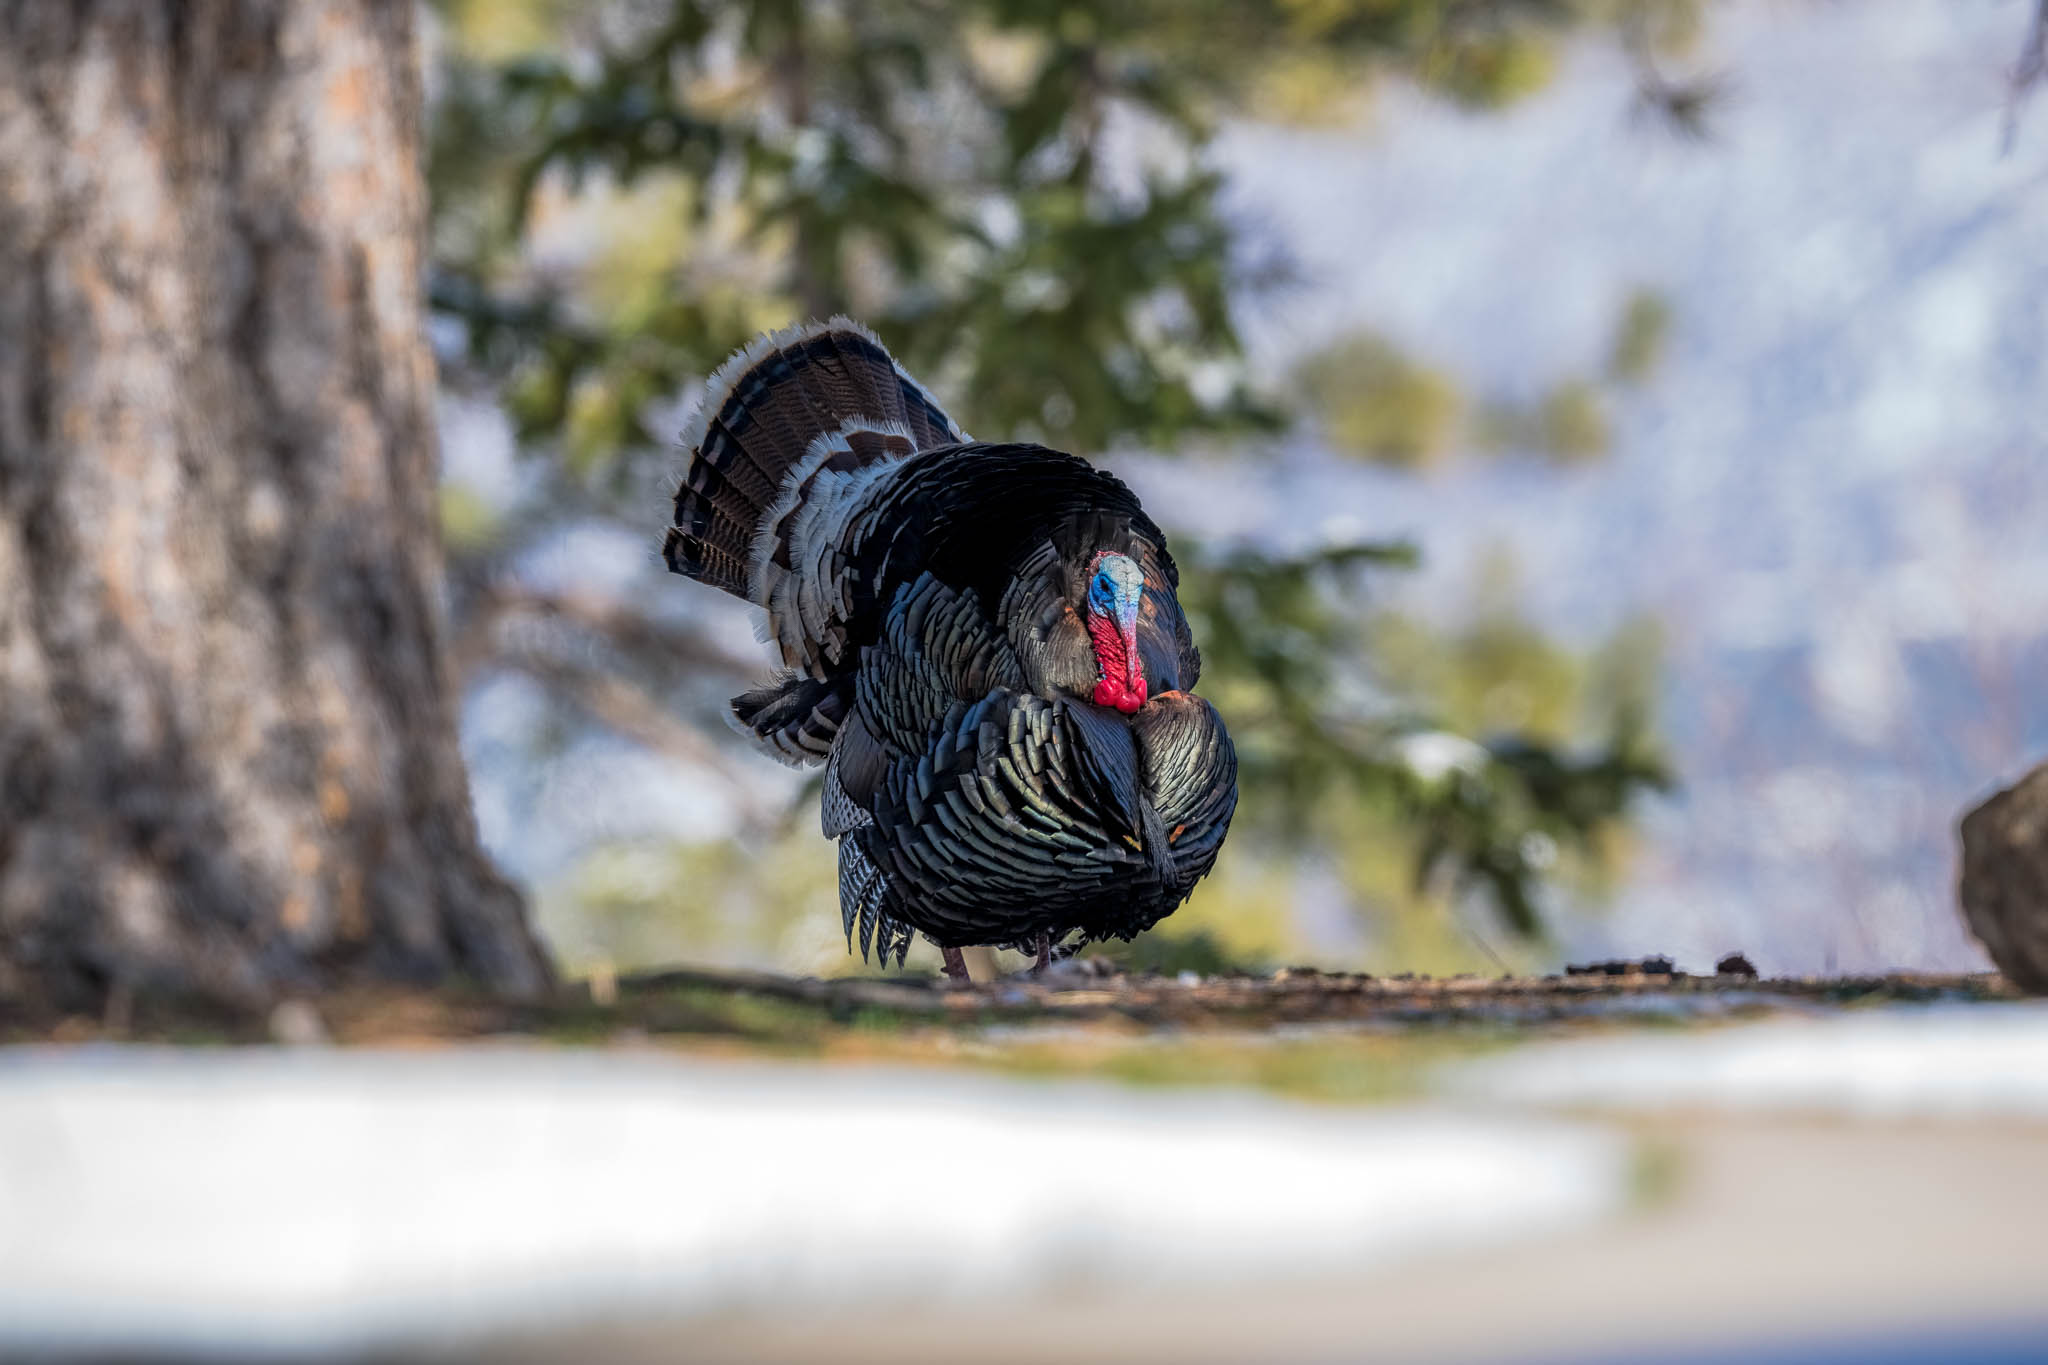 Bass Pro Shops Invests $500,000 in Critical Wild Turkey Research